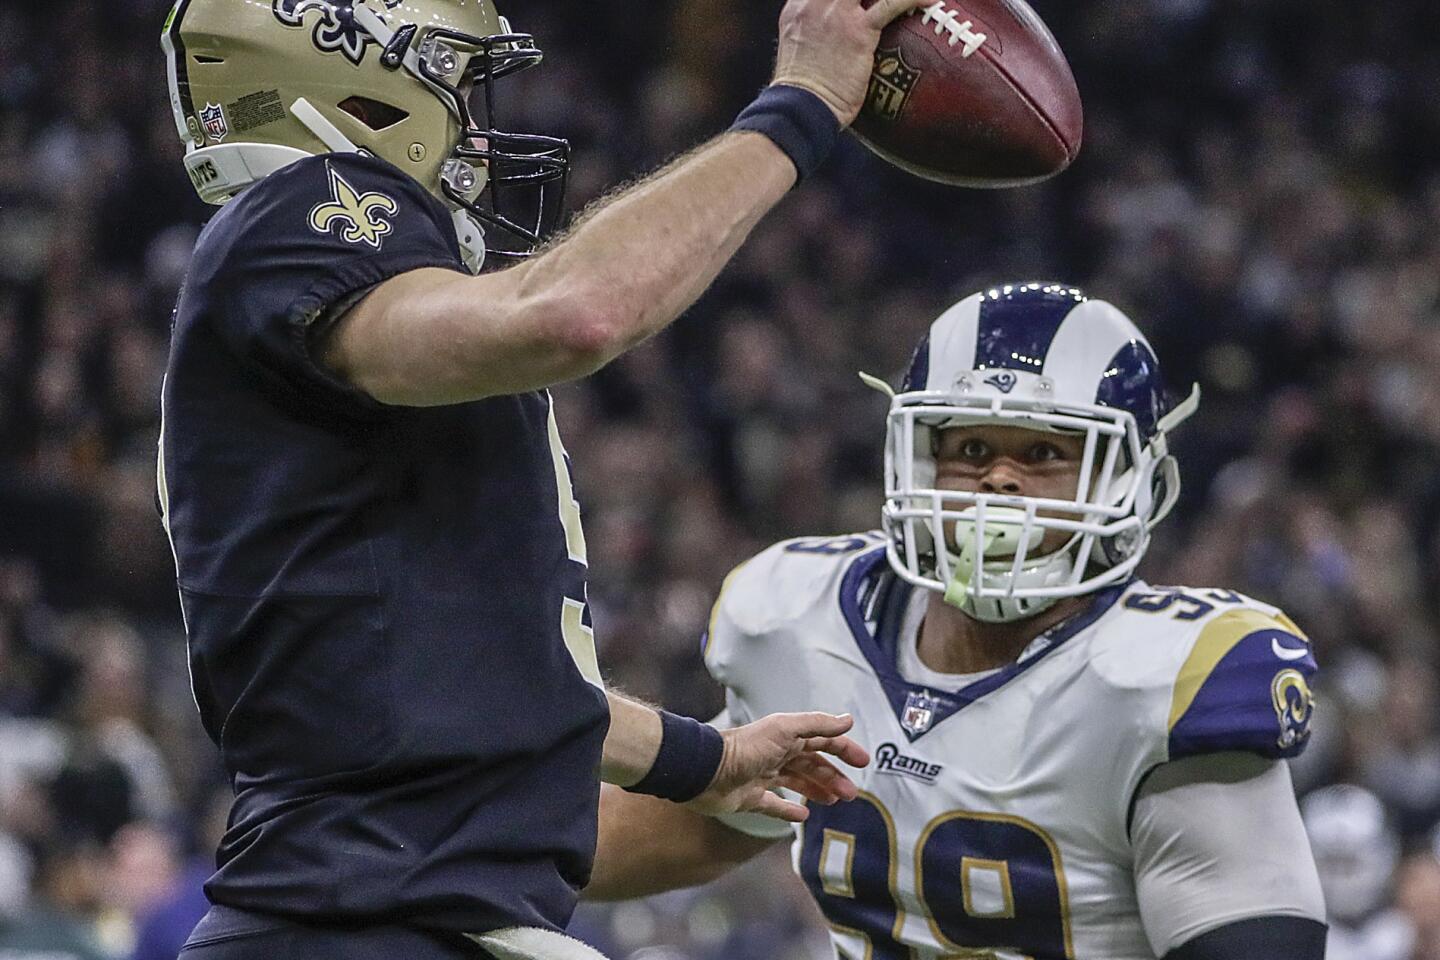 Rams defensive lineman Aaron Donald chases New Orleans Saints quarterback Drew Brees during second half action in the NFC Championship at the Superdome.